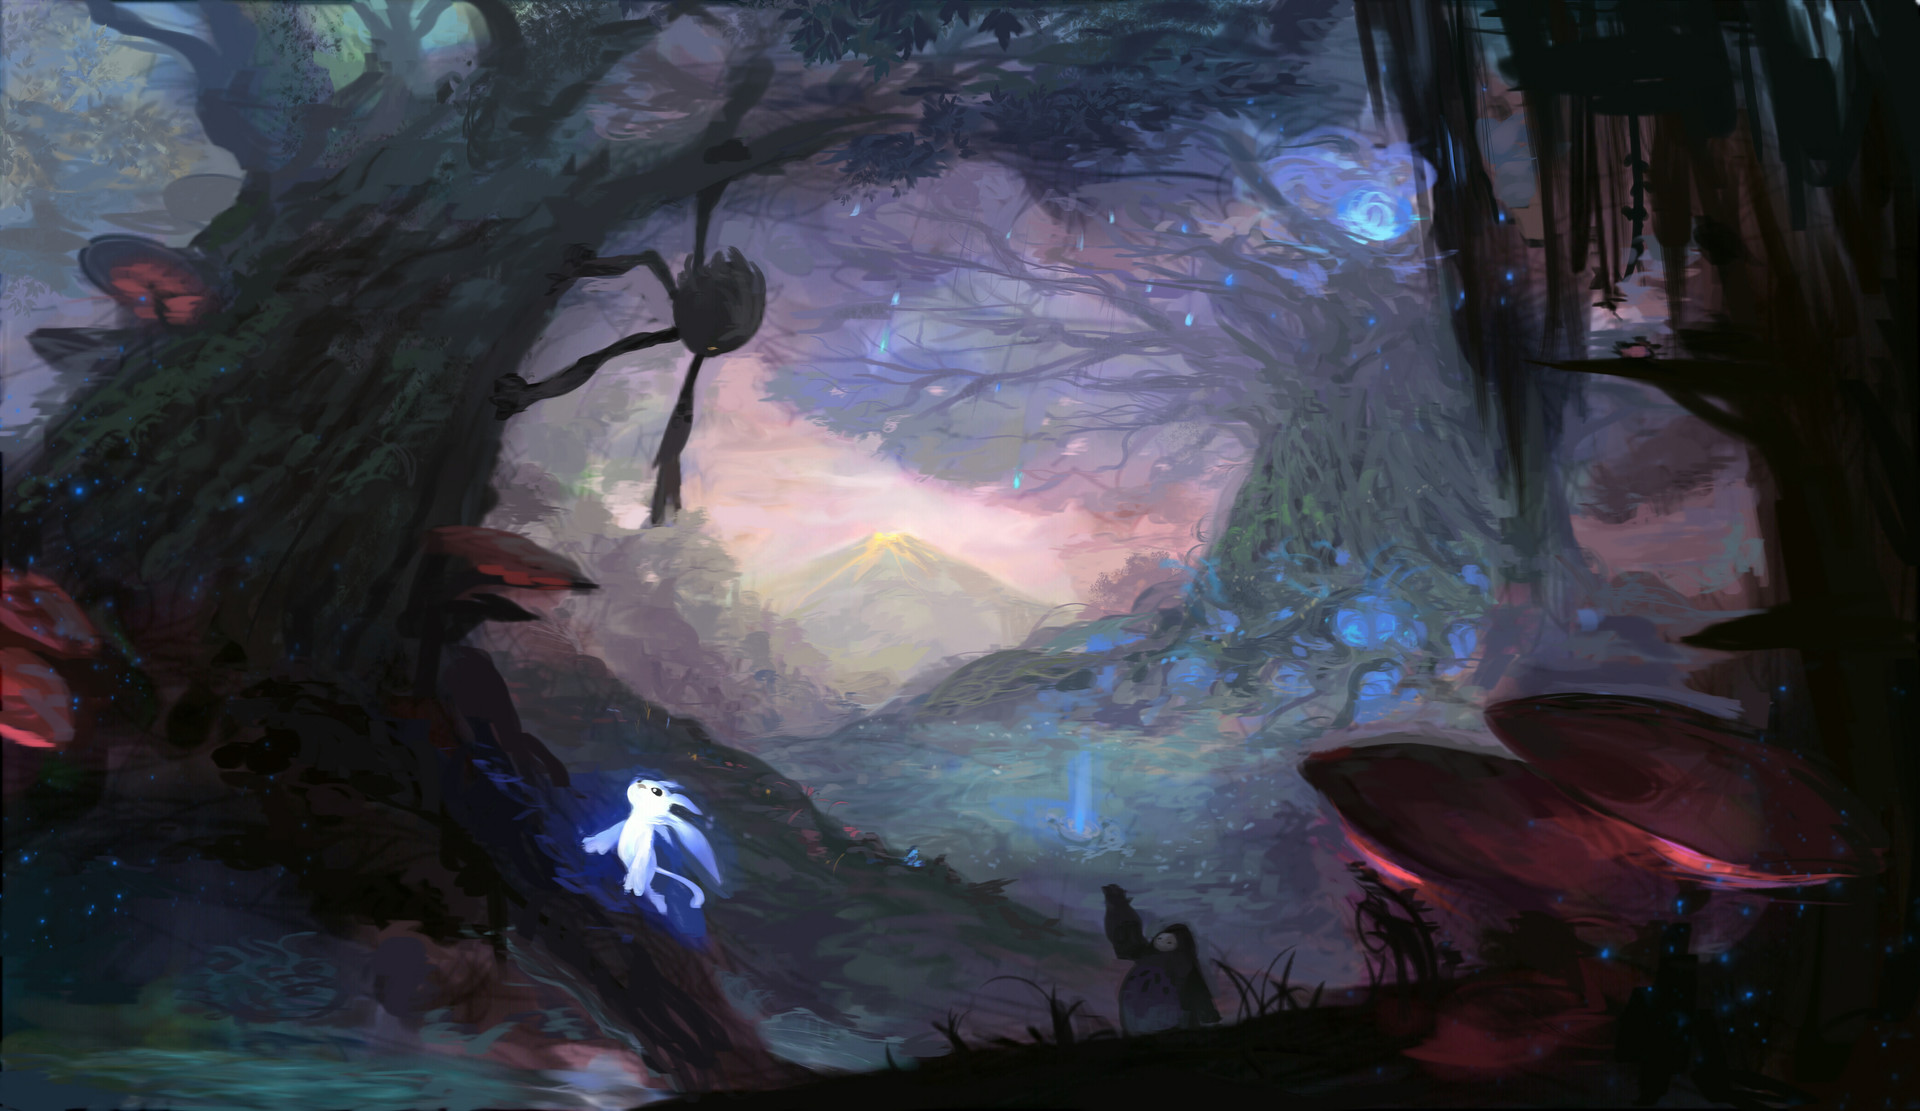 Ori and the blind forest fanart, Ngan Pham.